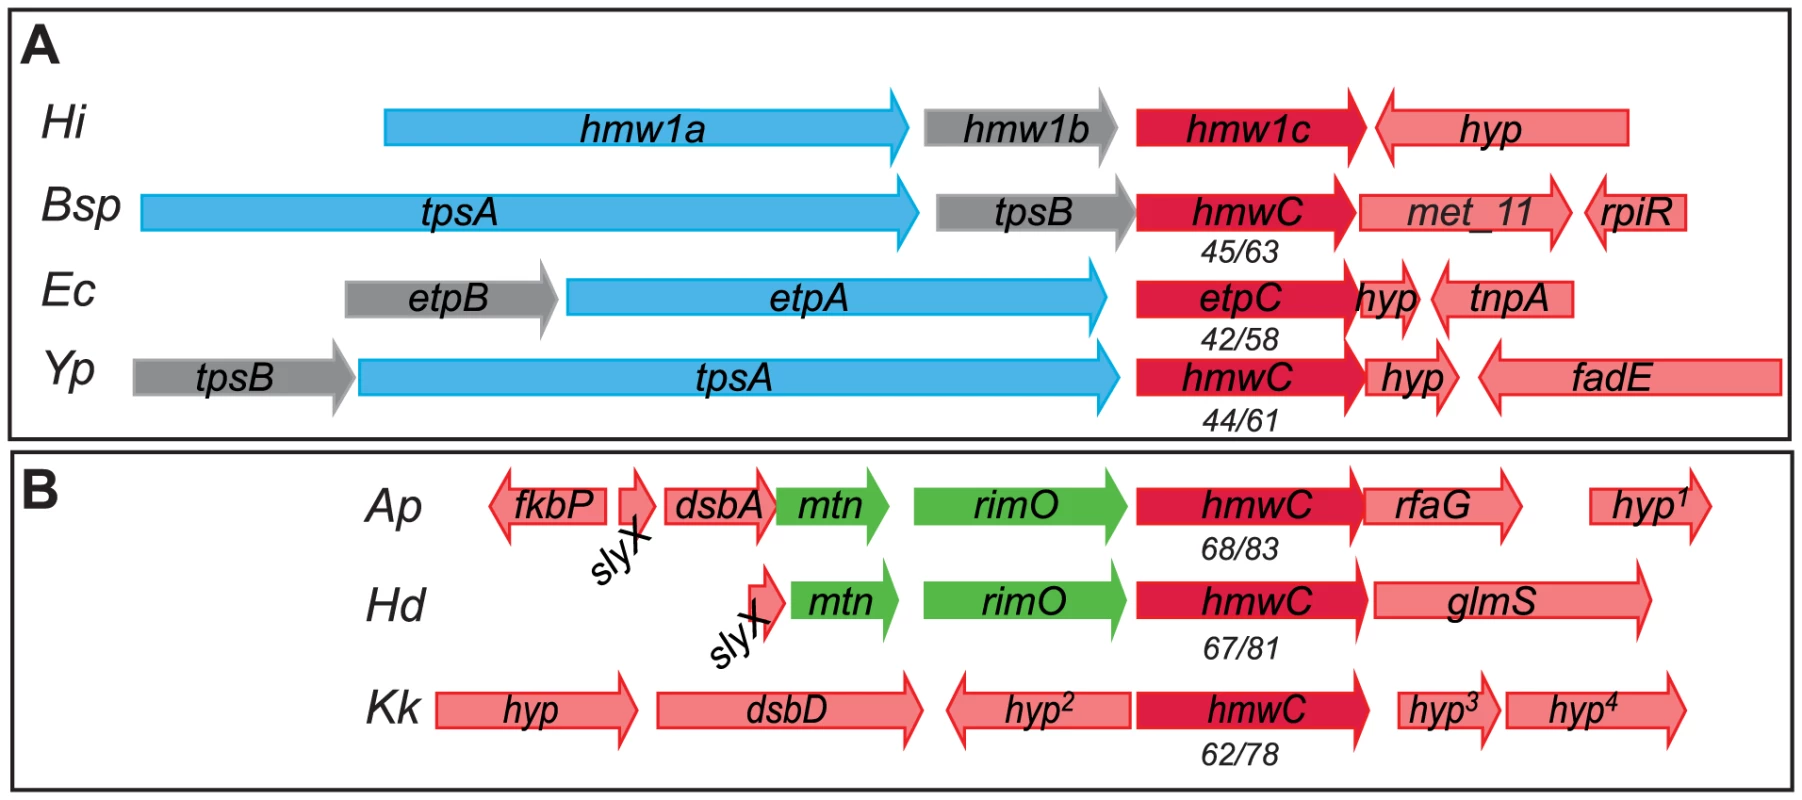 HMW1C-like proteins in two categories: Those encoded by loci that contain obvious substrate genes and those encoded by isolated genes without adjacent substrate genes.